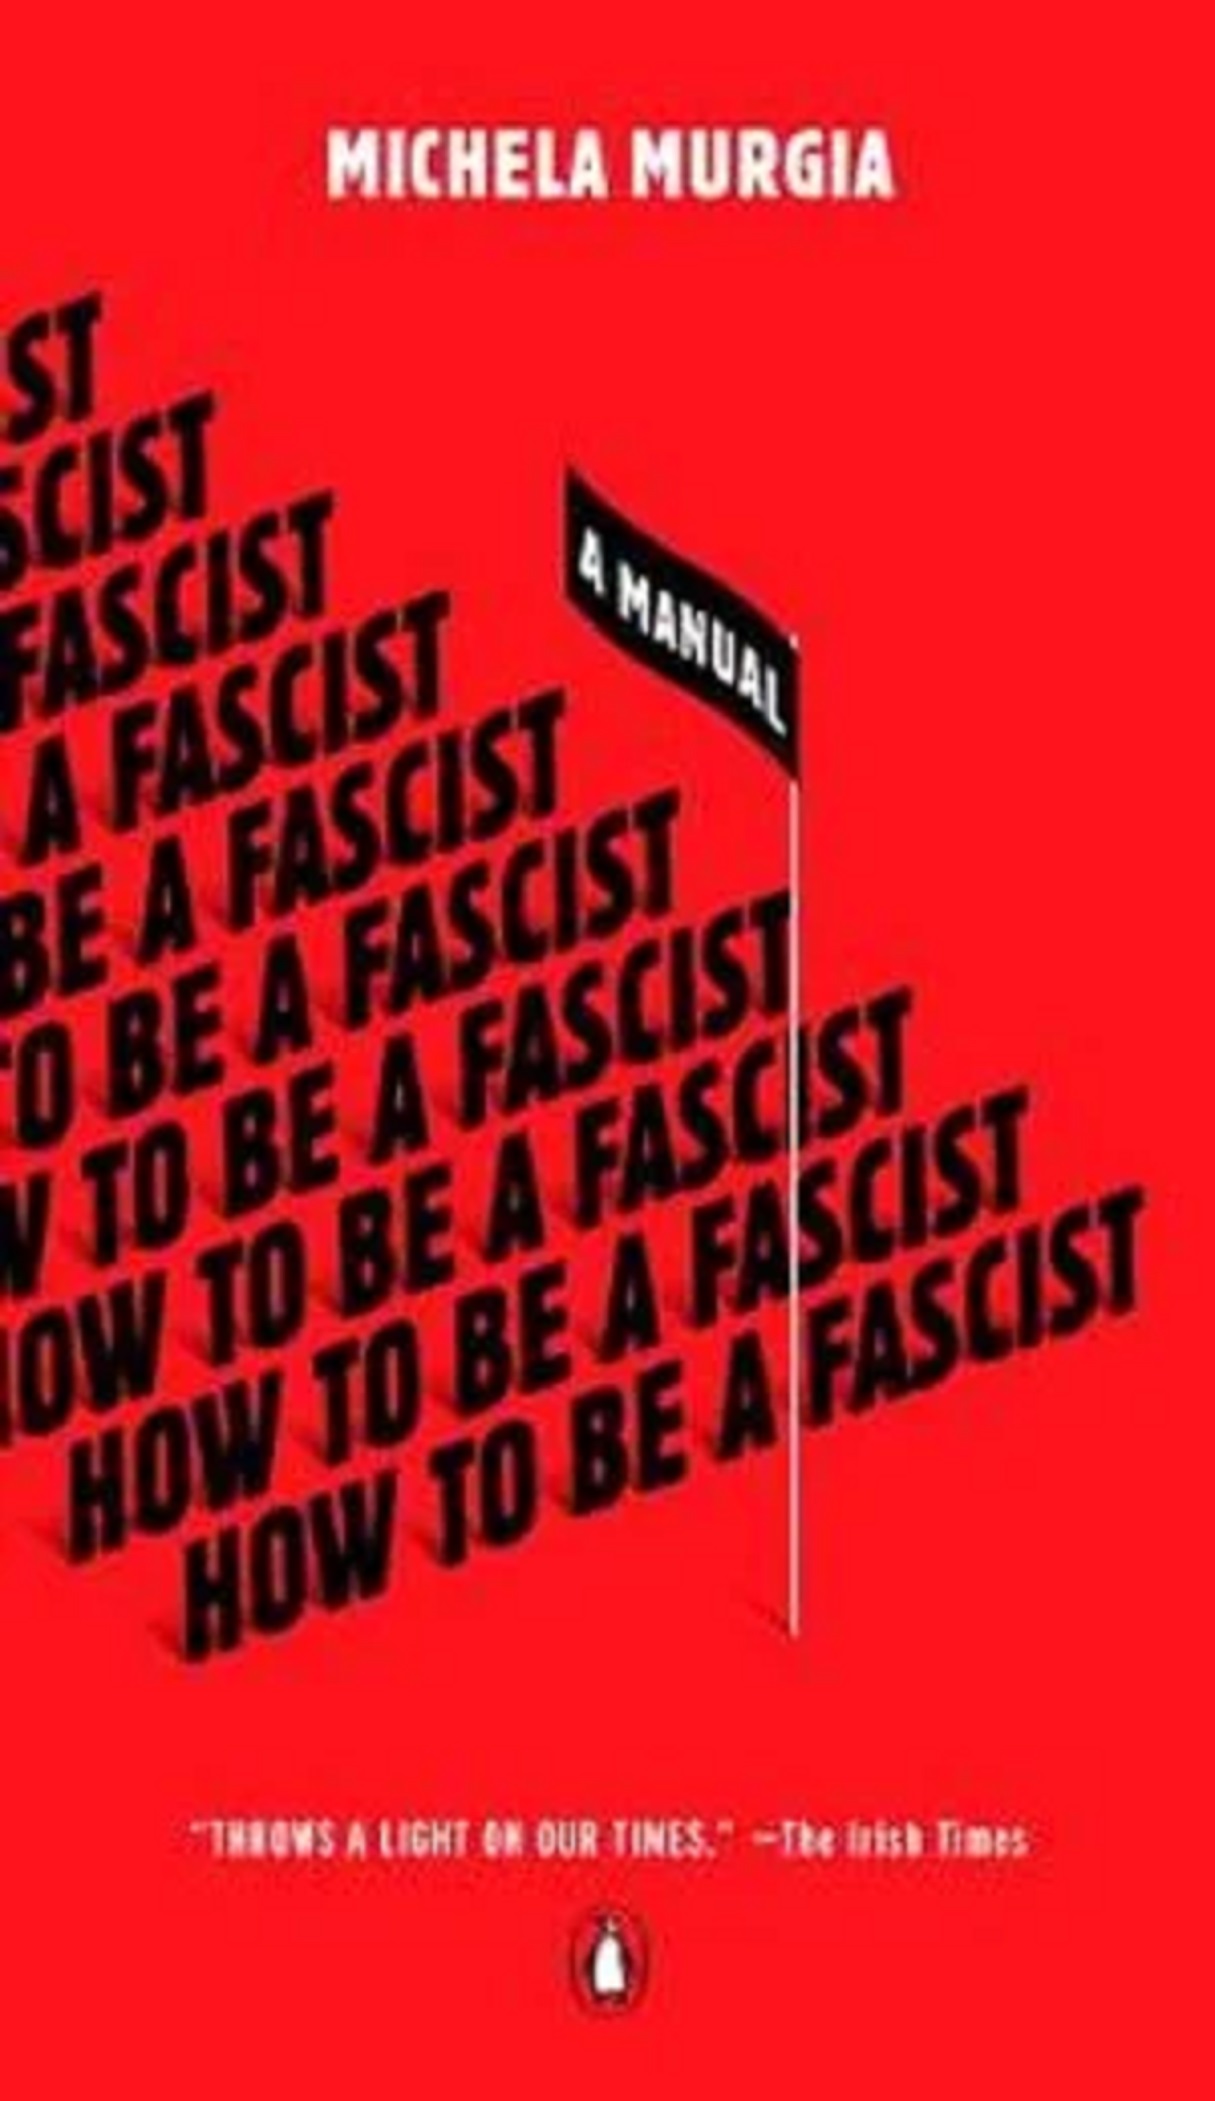 How To Be A Fascist